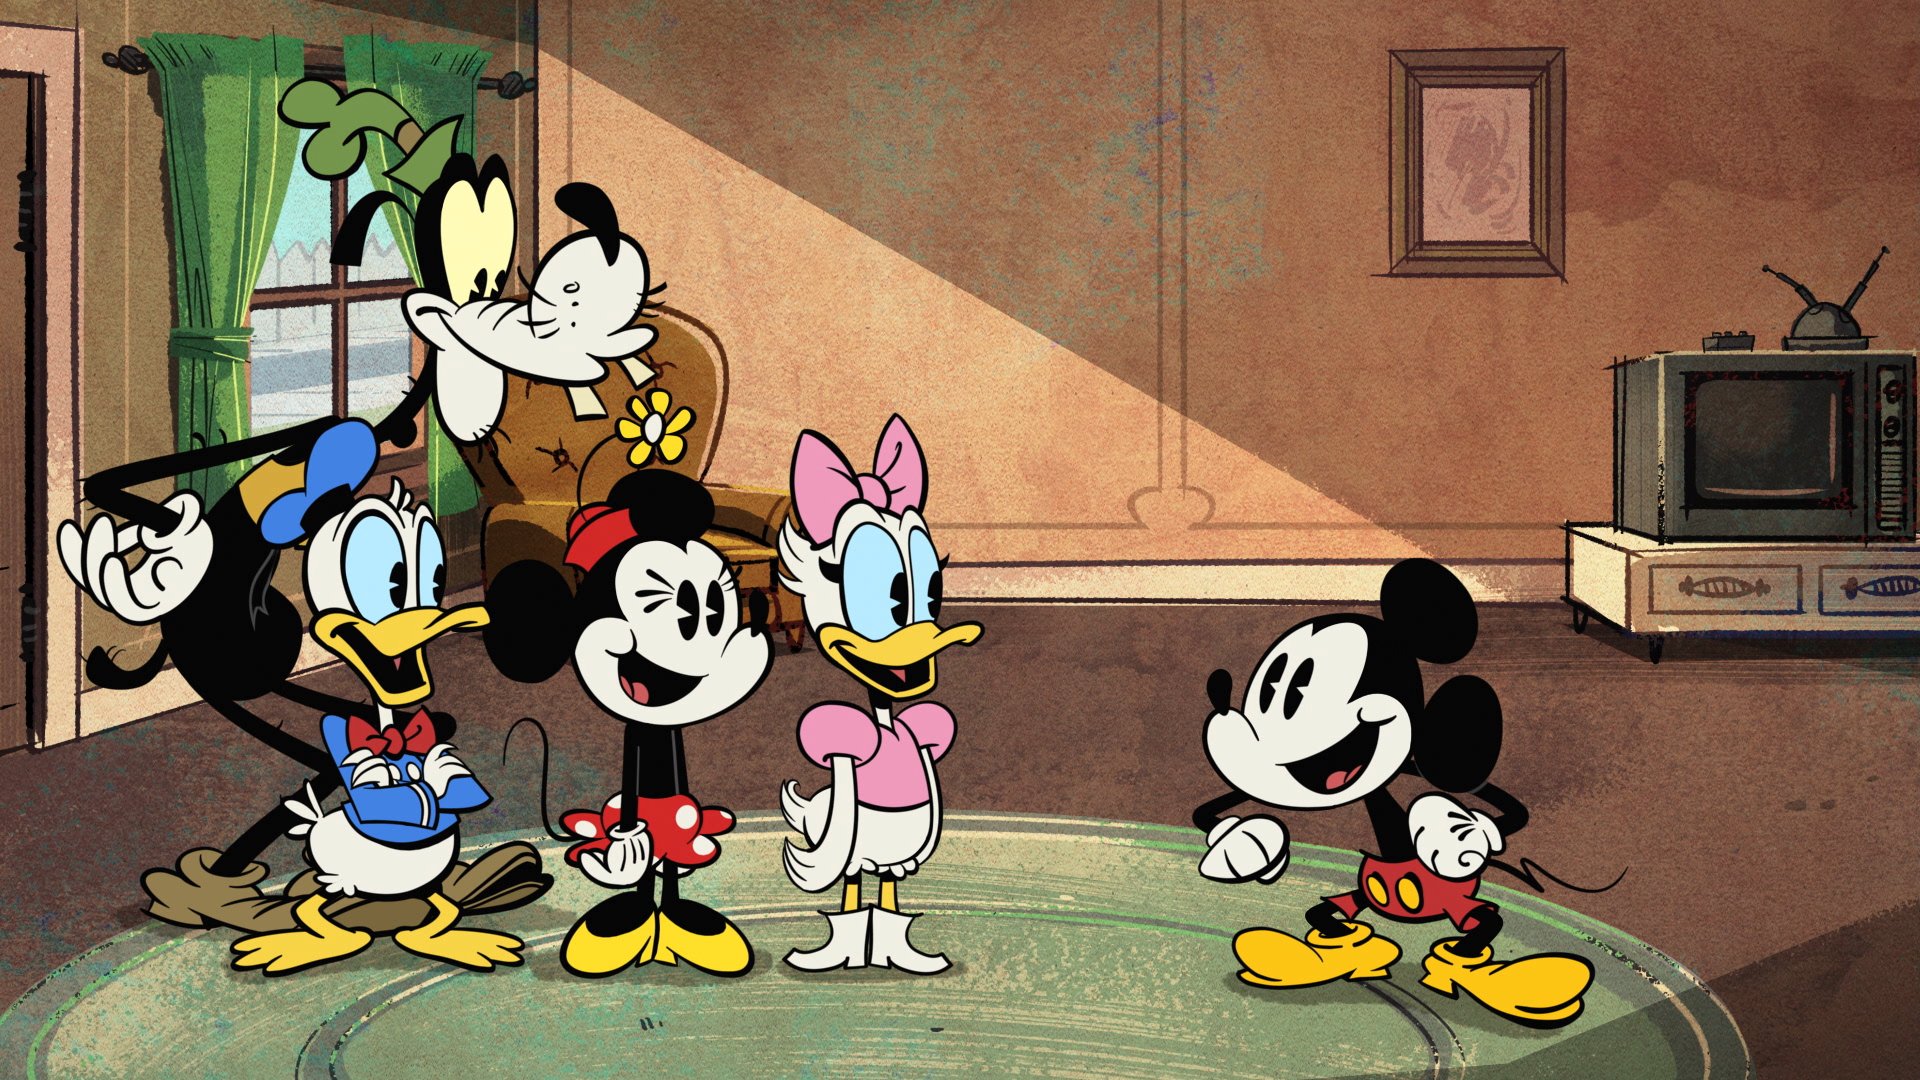 Disney Channel's 'Mickey Mouse' Episode 'Surprise!'